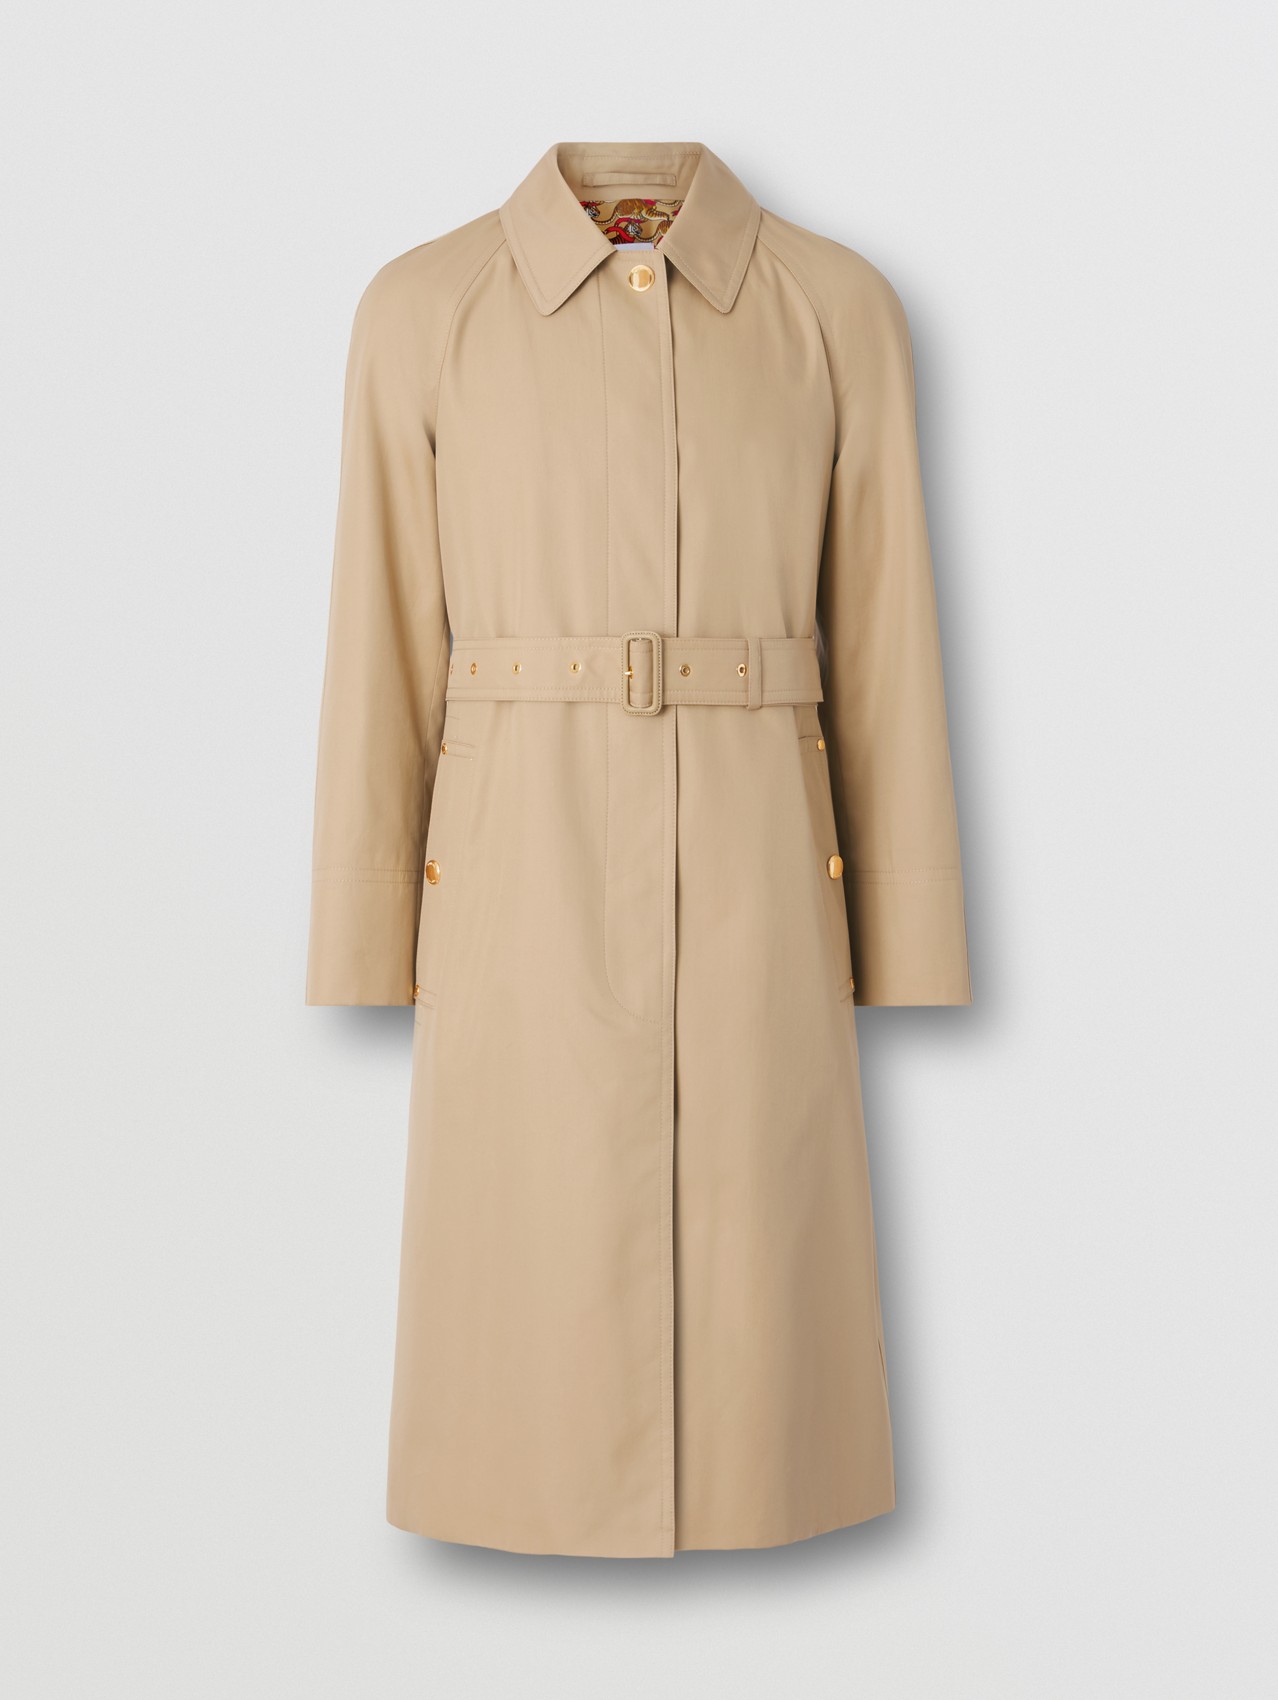 Tiger Print-lined Cotton Gabardine Belted Car Coat in Soft Fawn